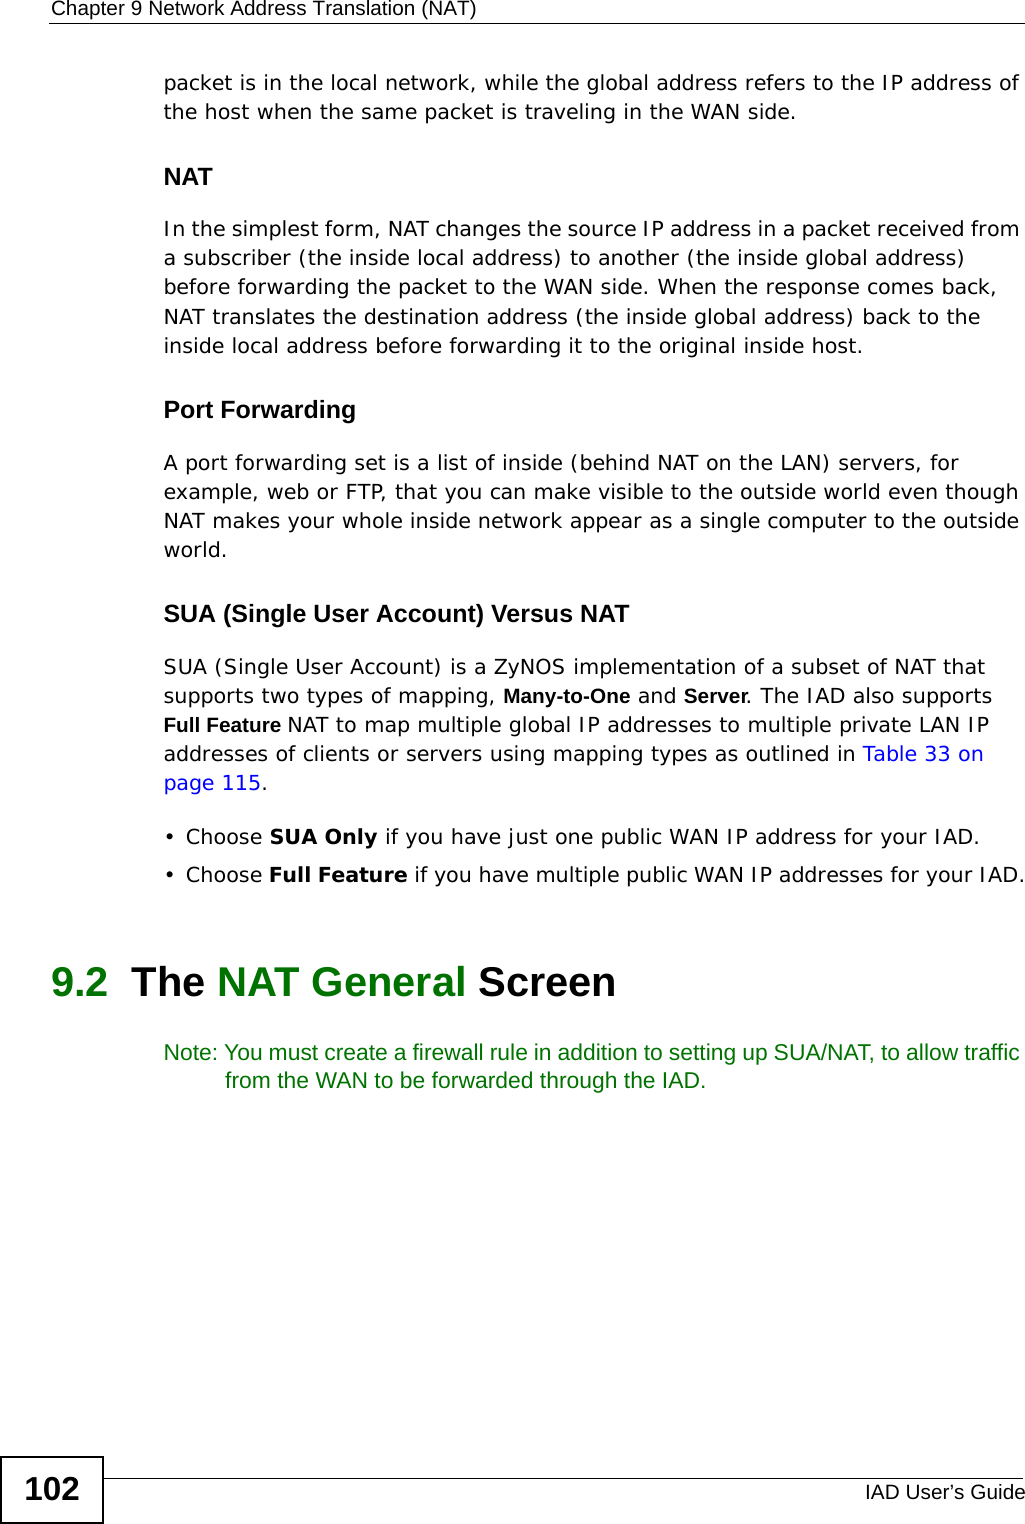 Chapter 9 Network Address Translation (NAT)IAD User’s Guide102packet is in the local network, while the global address refers to the IP address of the host when the same packet is traveling in the WAN side. NATIn the simplest form, NAT changes the source IP address in a packet received from a subscriber (the inside local address) to another (the inside global address) before forwarding the packet to the WAN side. When the response comes back, NAT translates the destination address (the inside global address) back to the inside local address before forwarding it to the original inside host.Port ForwardingA port forwarding set is a list of inside (behind NAT on the LAN) servers, for example, web or FTP, that you can make visible to the outside world even though NAT makes your whole inside network appear as a single computer to the outside world.SUA (Single User Account) Versus NATSUA (Single User Account) is a ZyNOS implementation of a subset of NAT that supports two types of mapping, Many-to-One and Server. The IAD also supports Full Feature NAT to map multiple global IP addresses to multiple private LAN IP addresses of clients or servers using mapping types as outlined in Table 33 on page 115. • Choose SUA Only if you have just one public WAN IP address for your IAD.• Choose Full Feature if you have multiple public WAN IP addresses for your IAD.9.2  The NAT General ScreenNote: You must create a firewall rule in addition to setting up SUA/NAT, to allow traffic from the WAN to be forwarded through the IAD.